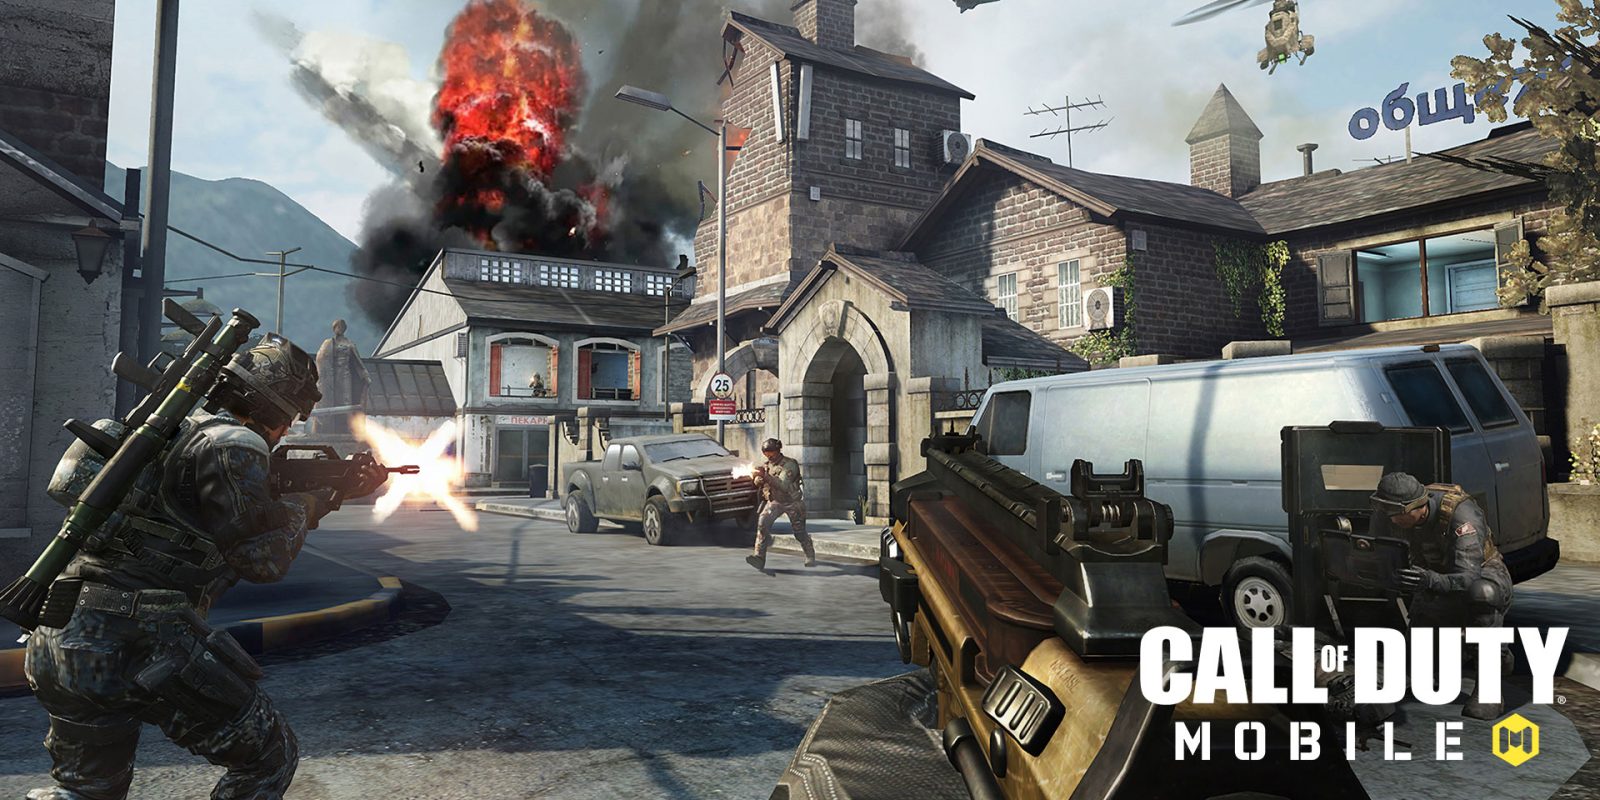 Call of Duty' launches first ever mobile game - here's what you